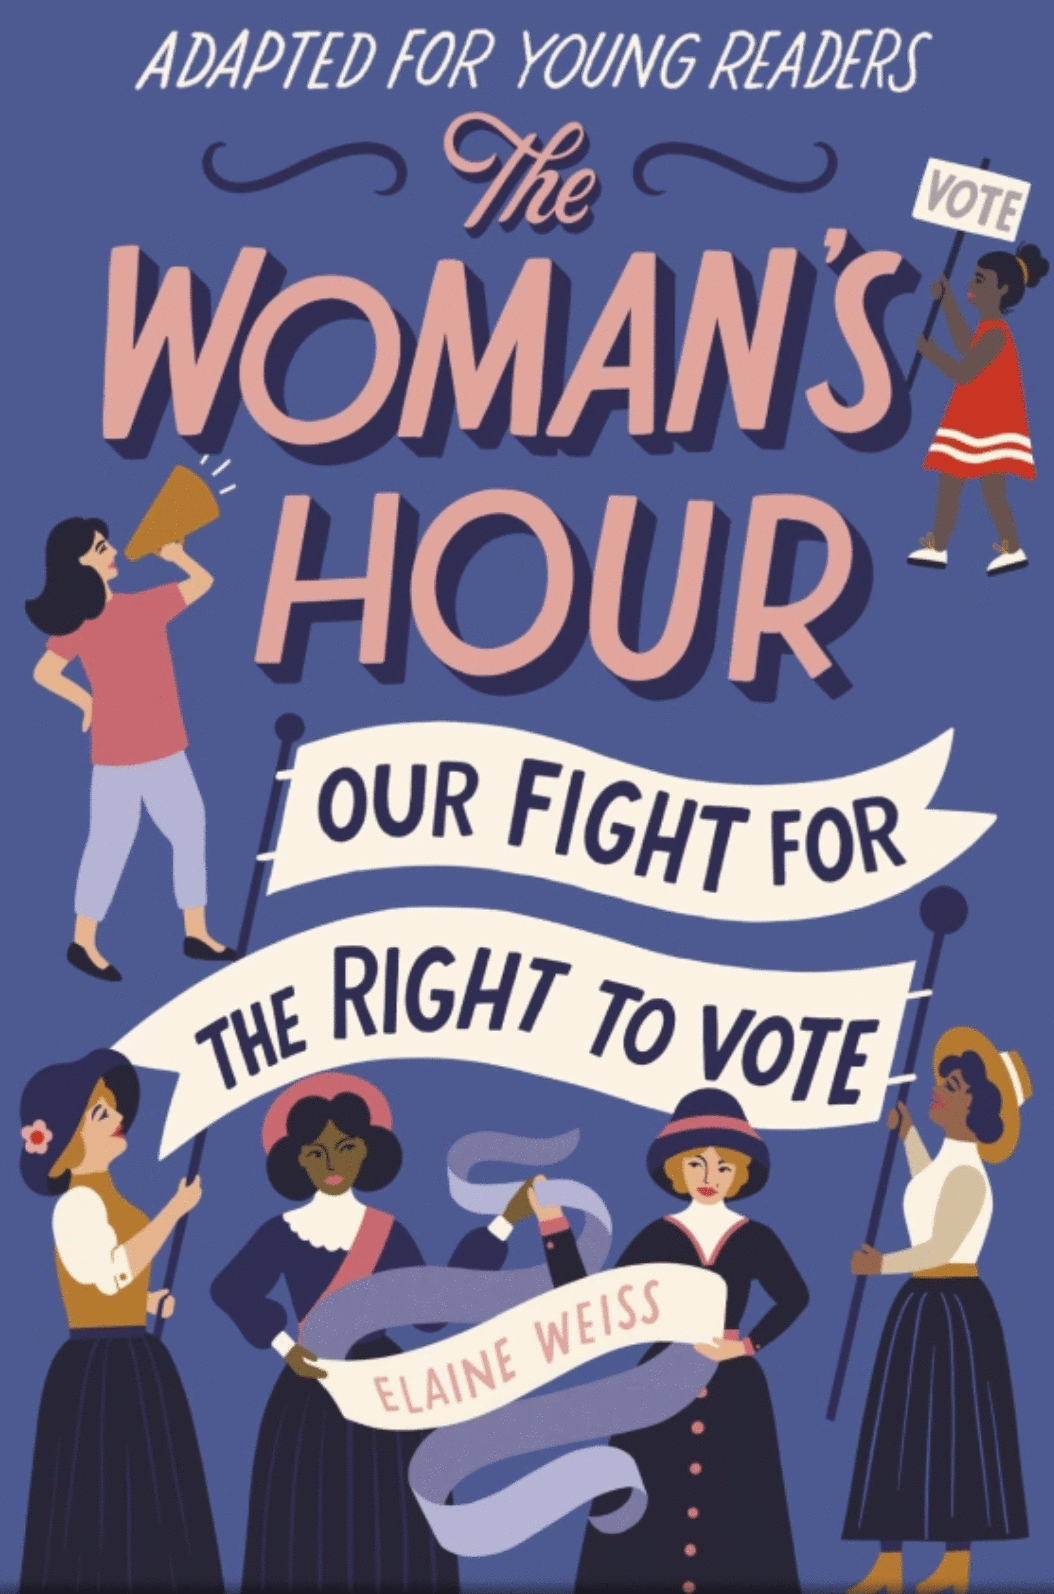 The Woman's Hour, Adapted for Young Readers Edition by Elaine Weiss cover.